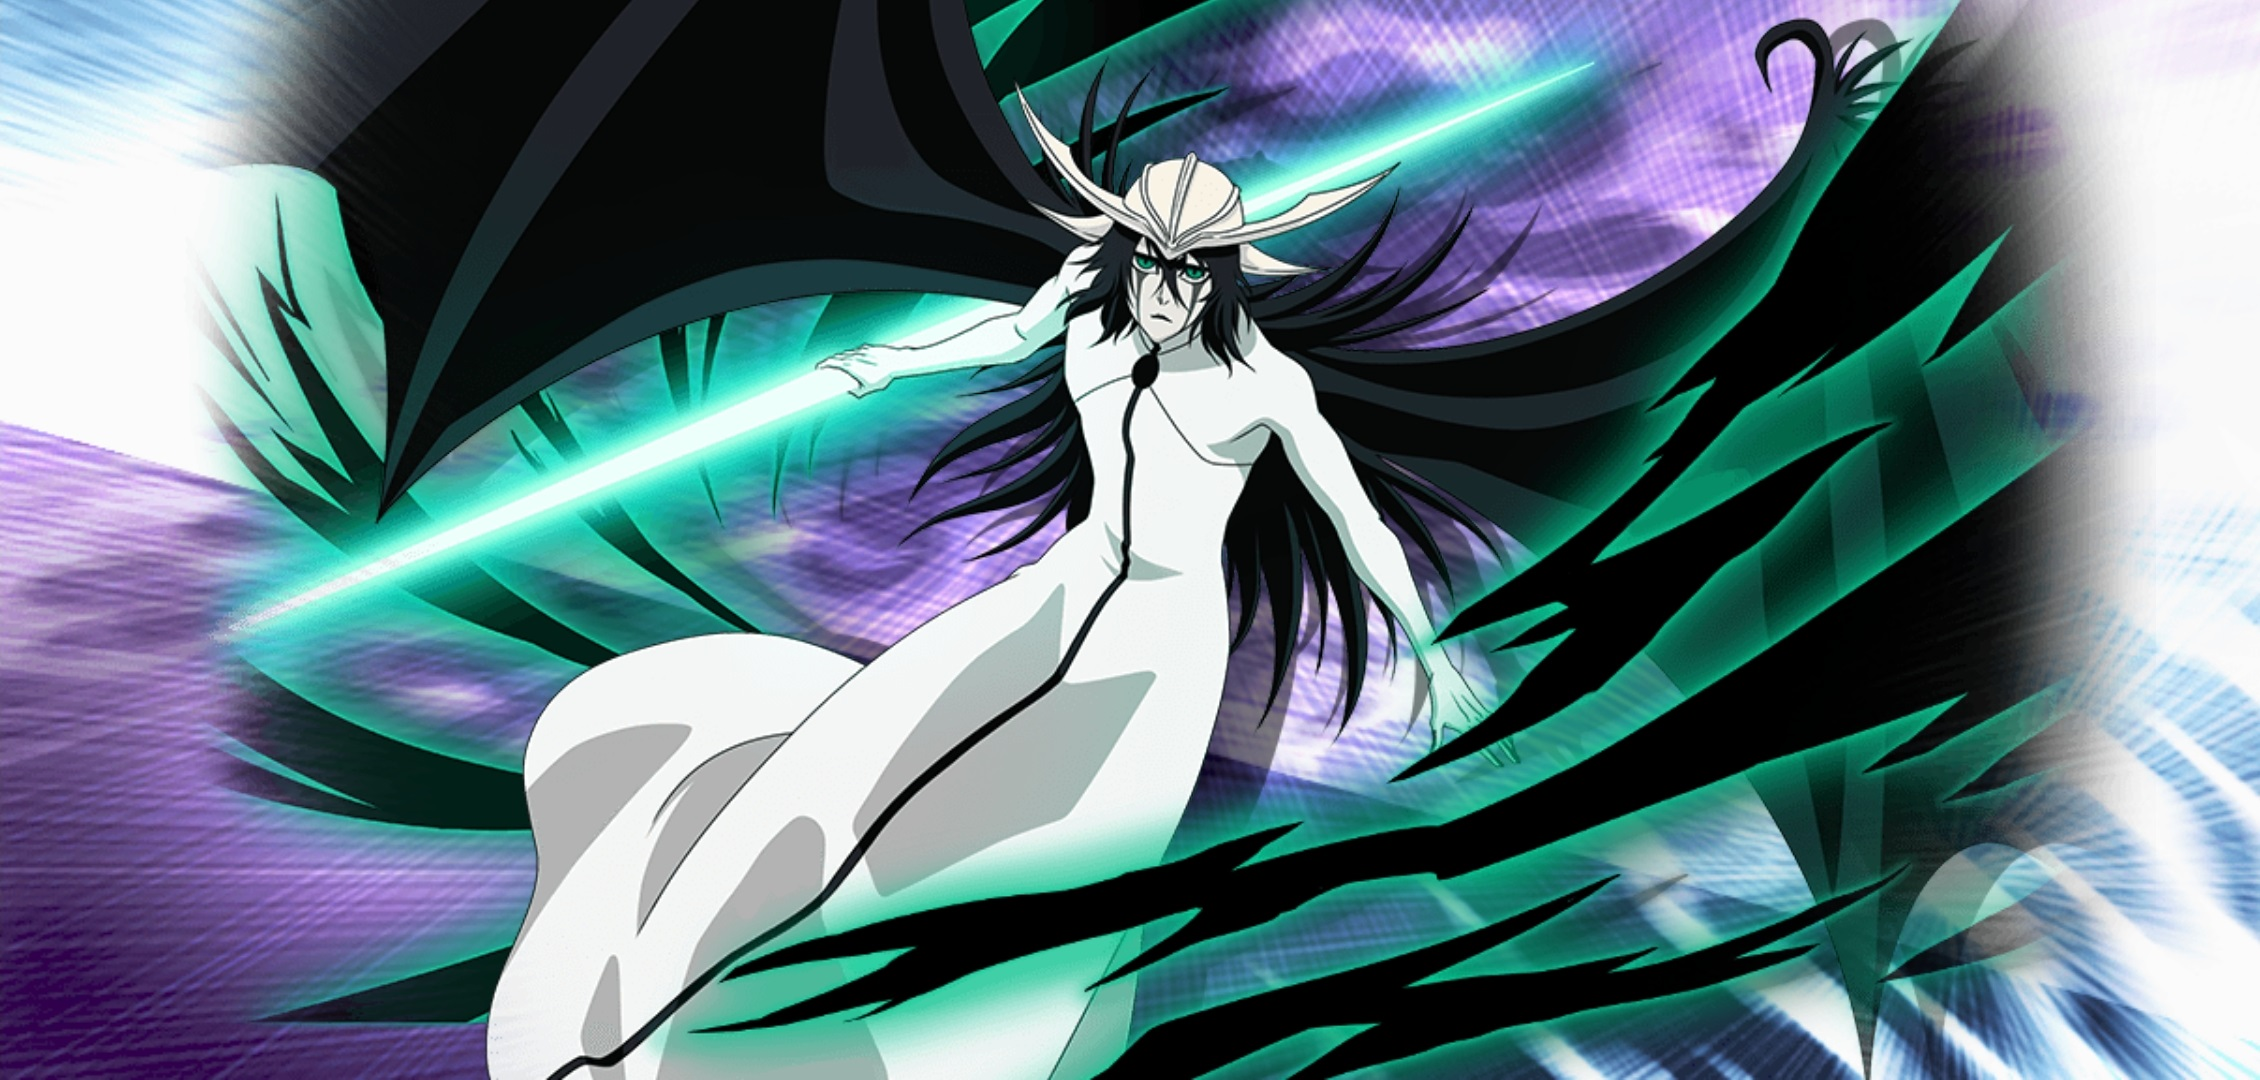 bleach - Why is Ulquiorra the only Espada with a second release? - Anime &  Manga Stack Exchange